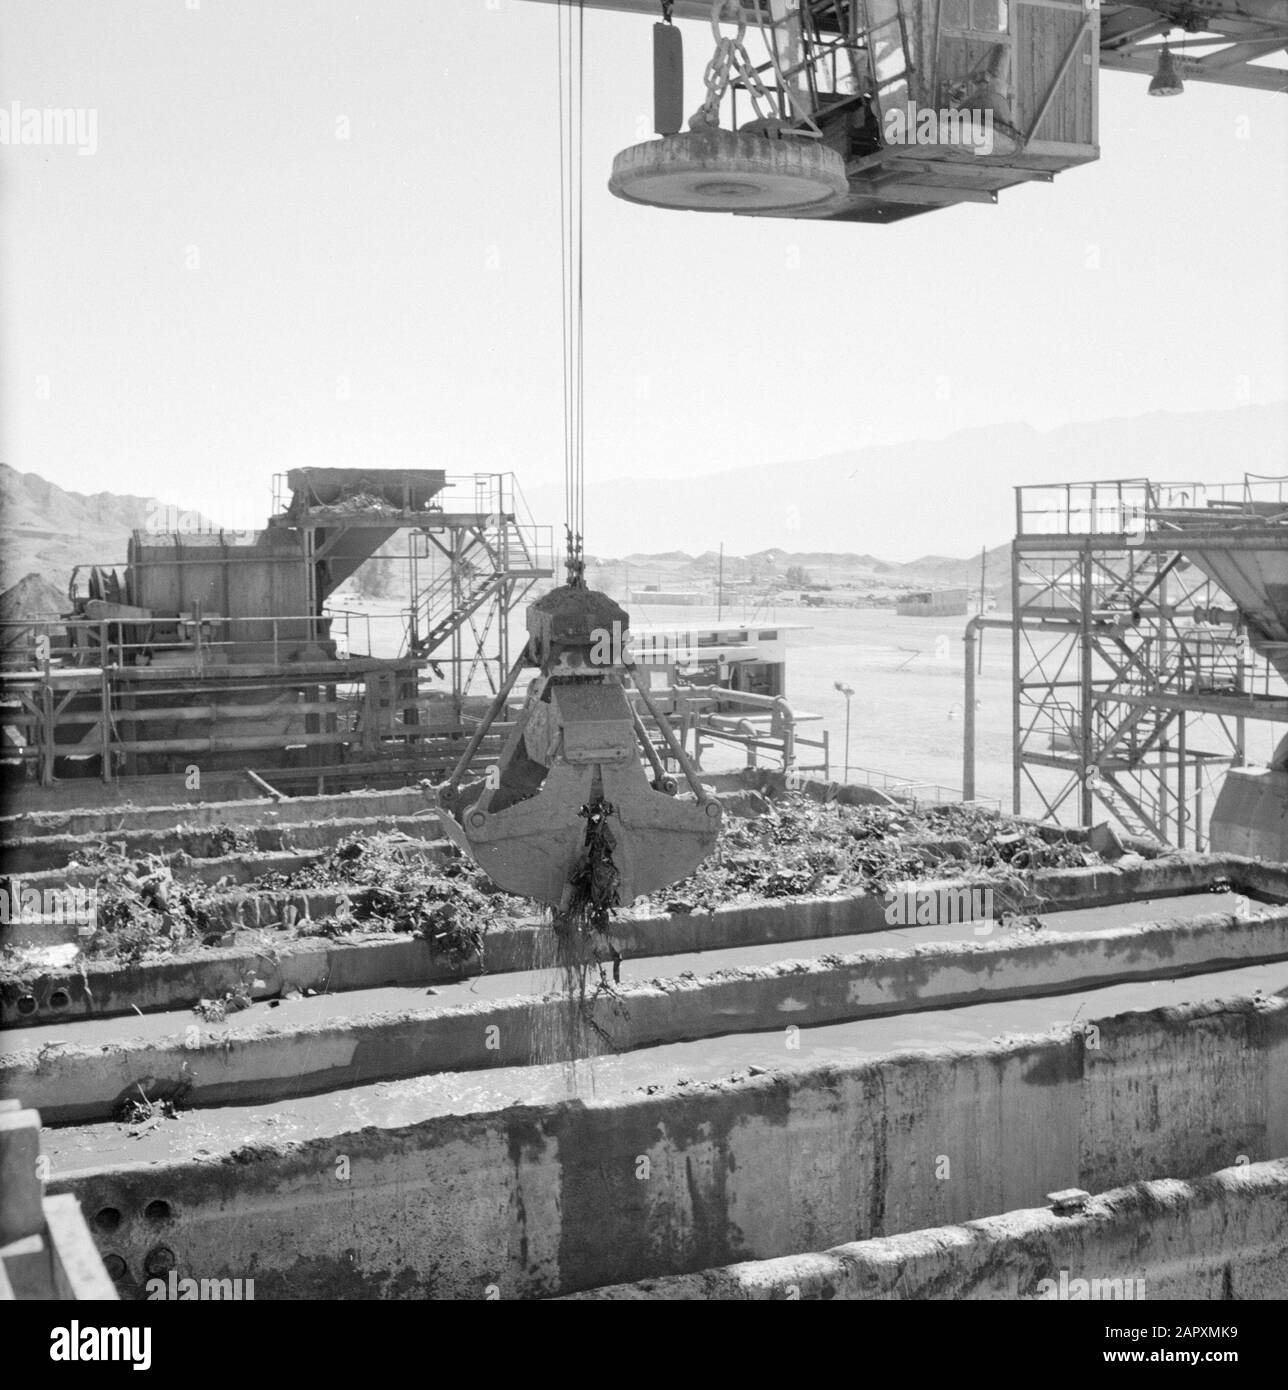 Israel - Timna  Timna in the Negev Desert; the site of copper mines with concrete boxes for storage of materials and a dragline Date: January 1, 1963 Location: Israel, Negev, Timna Keywords: excavators, industry, copper, mining, warehouses, deserts Stock Photo